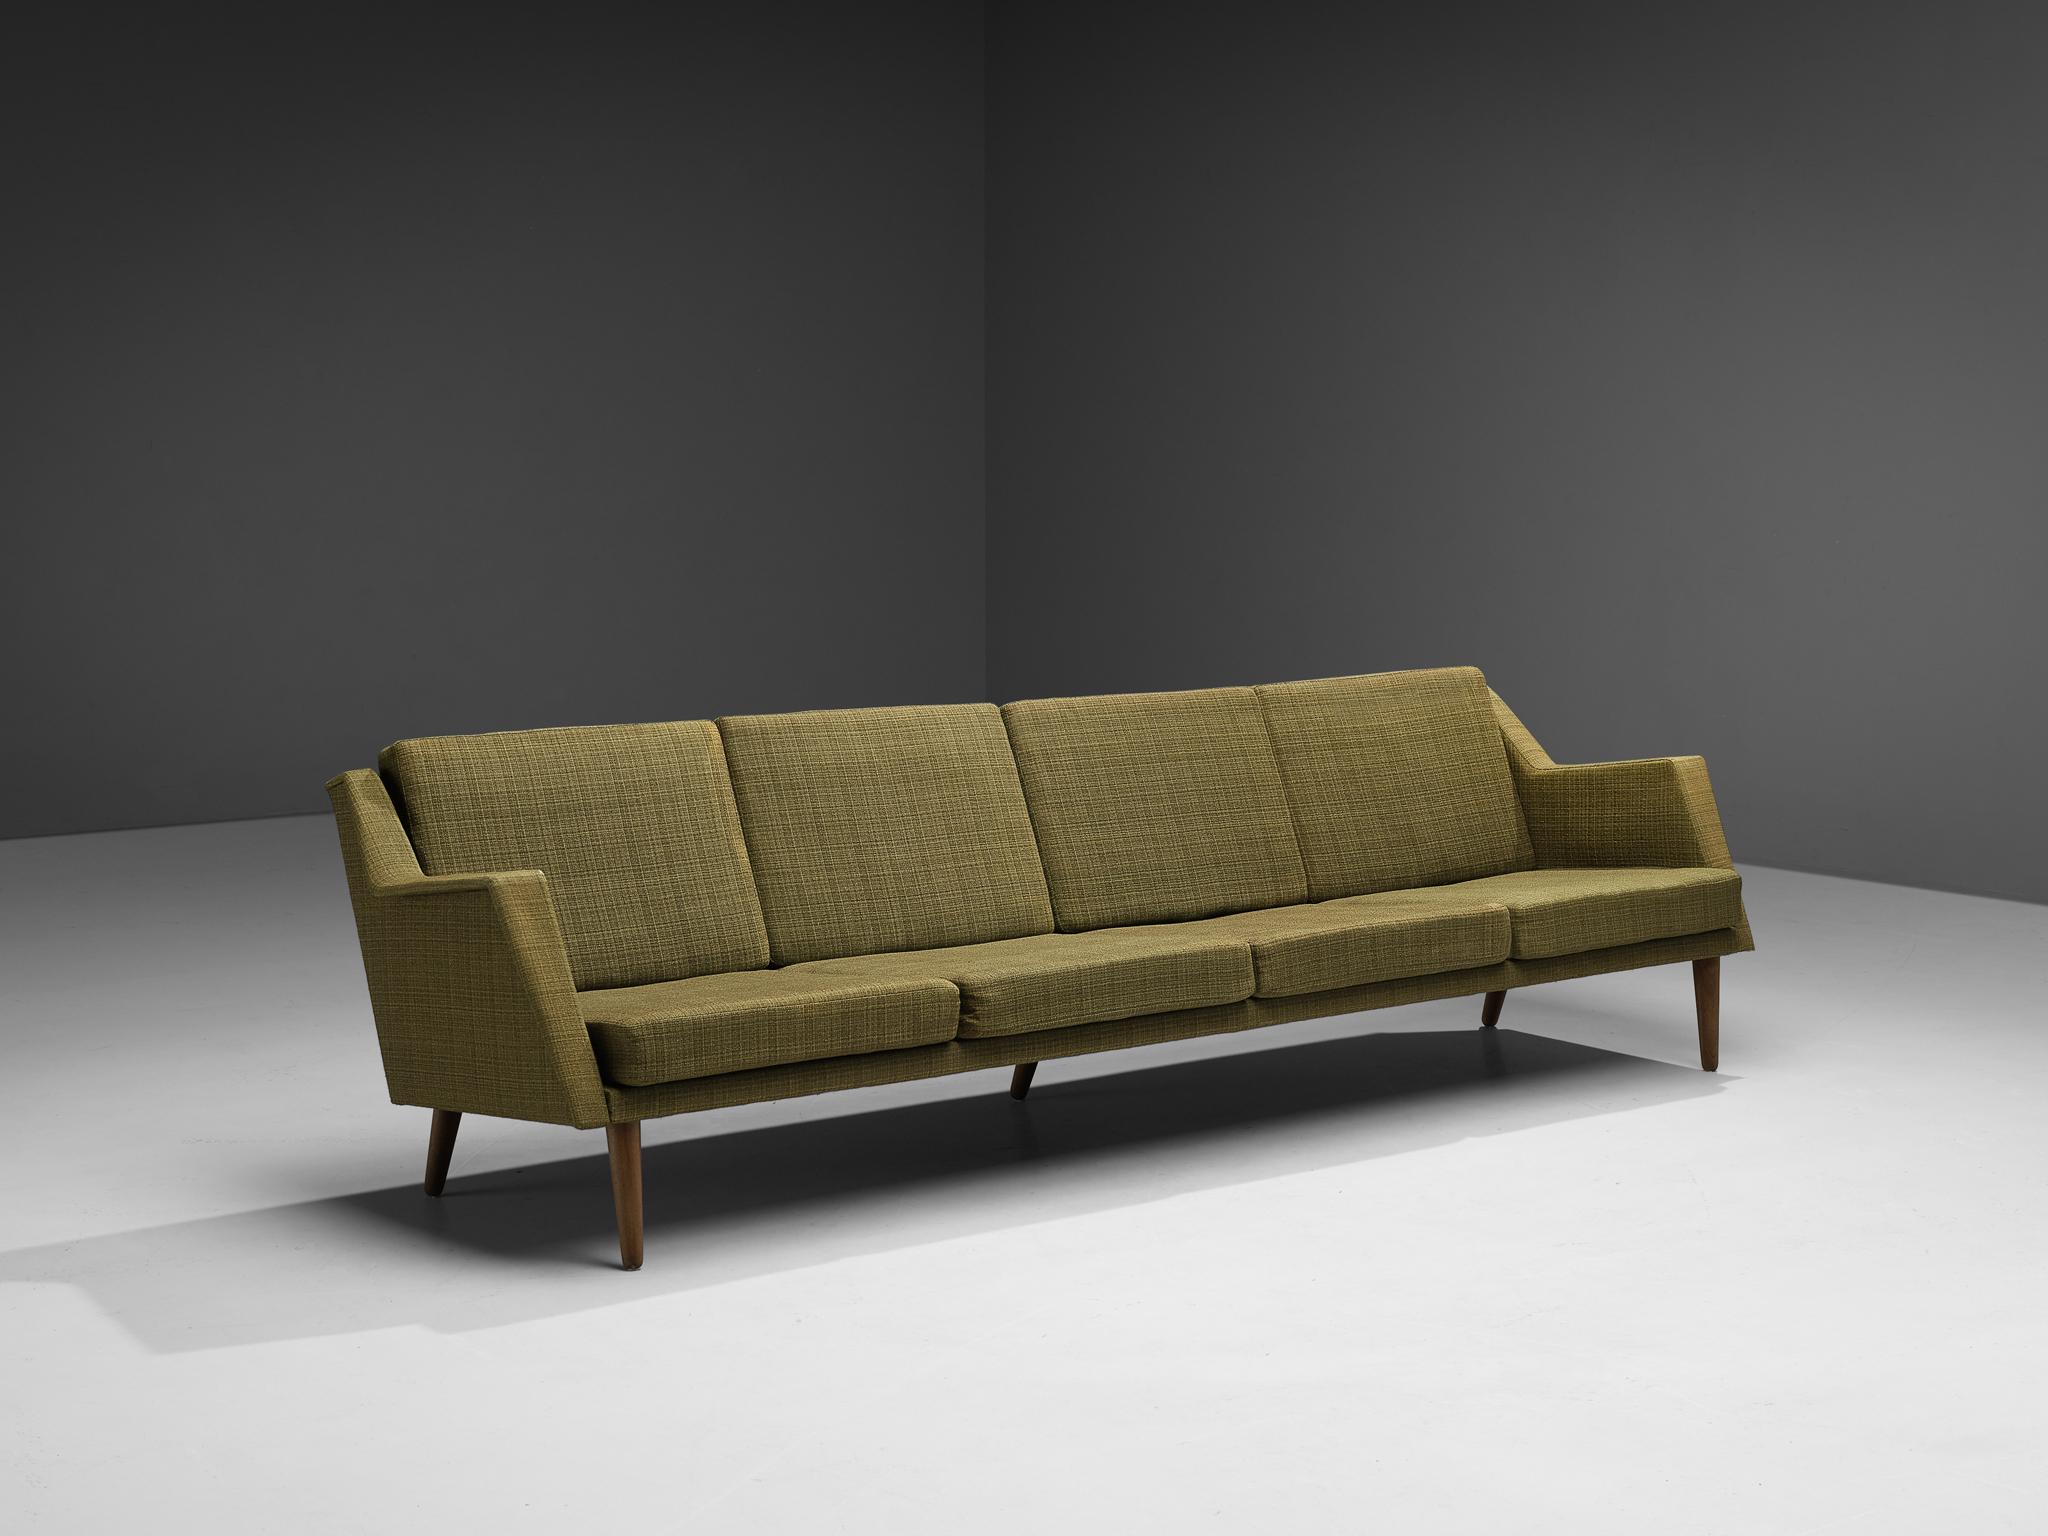 Four seat sofa, teak, fabric, Denmark, 1950s

Typical Scandinavian Modern sofa with modest yet striking lines. The way the armrests bent outwards remind of the designed by Folke Ohlsson. Looking from the side, the relationship between frame and seat